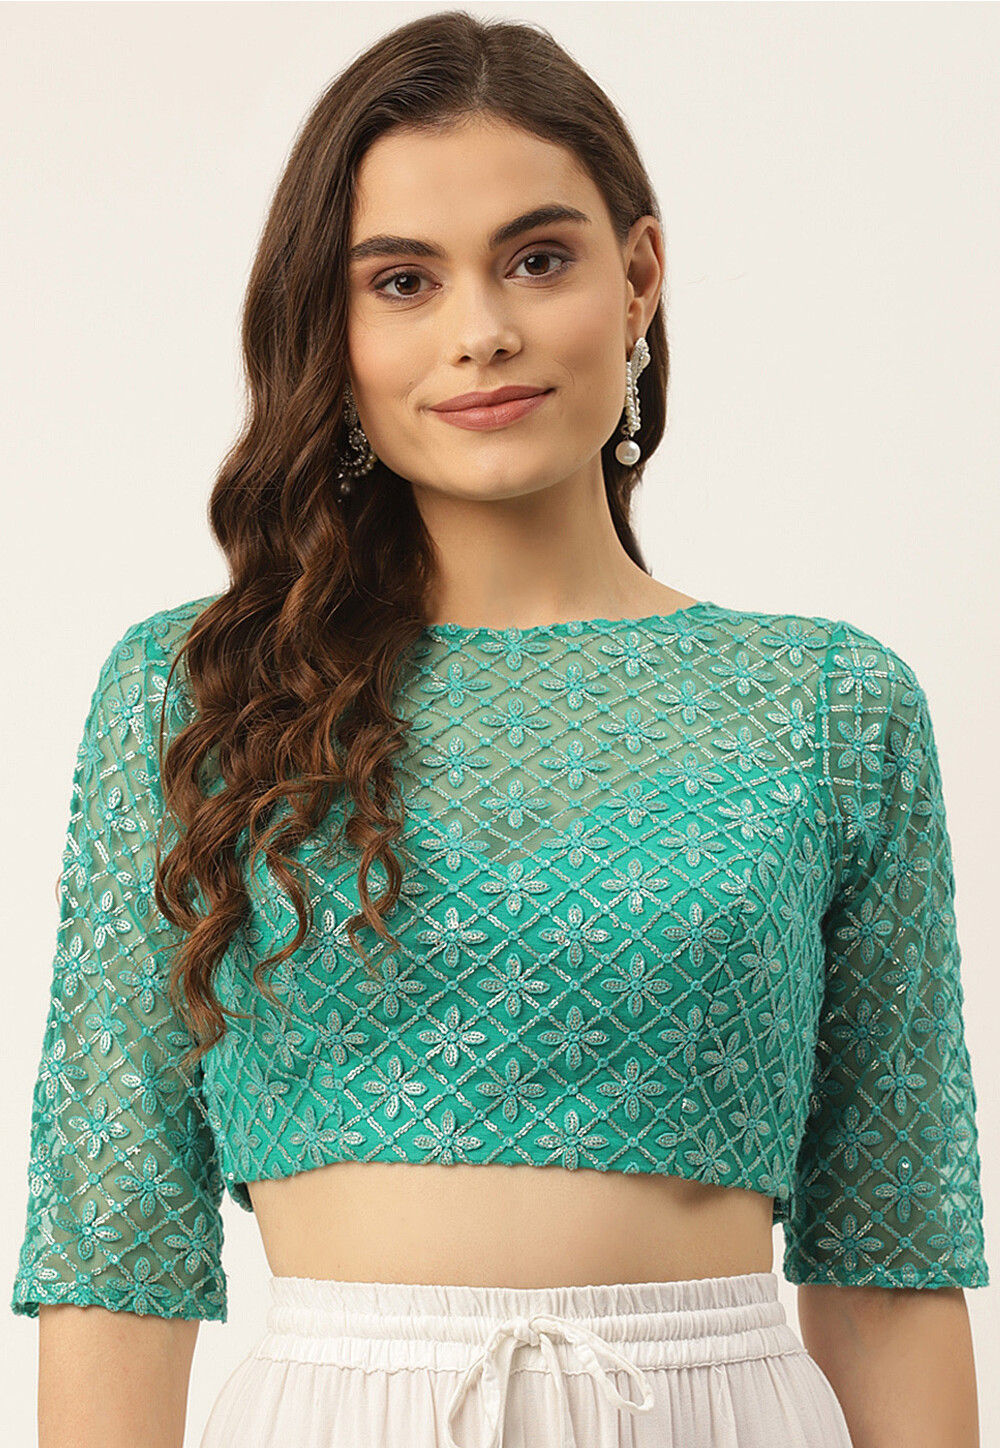 Embroidered Net Blouse in Teal Green